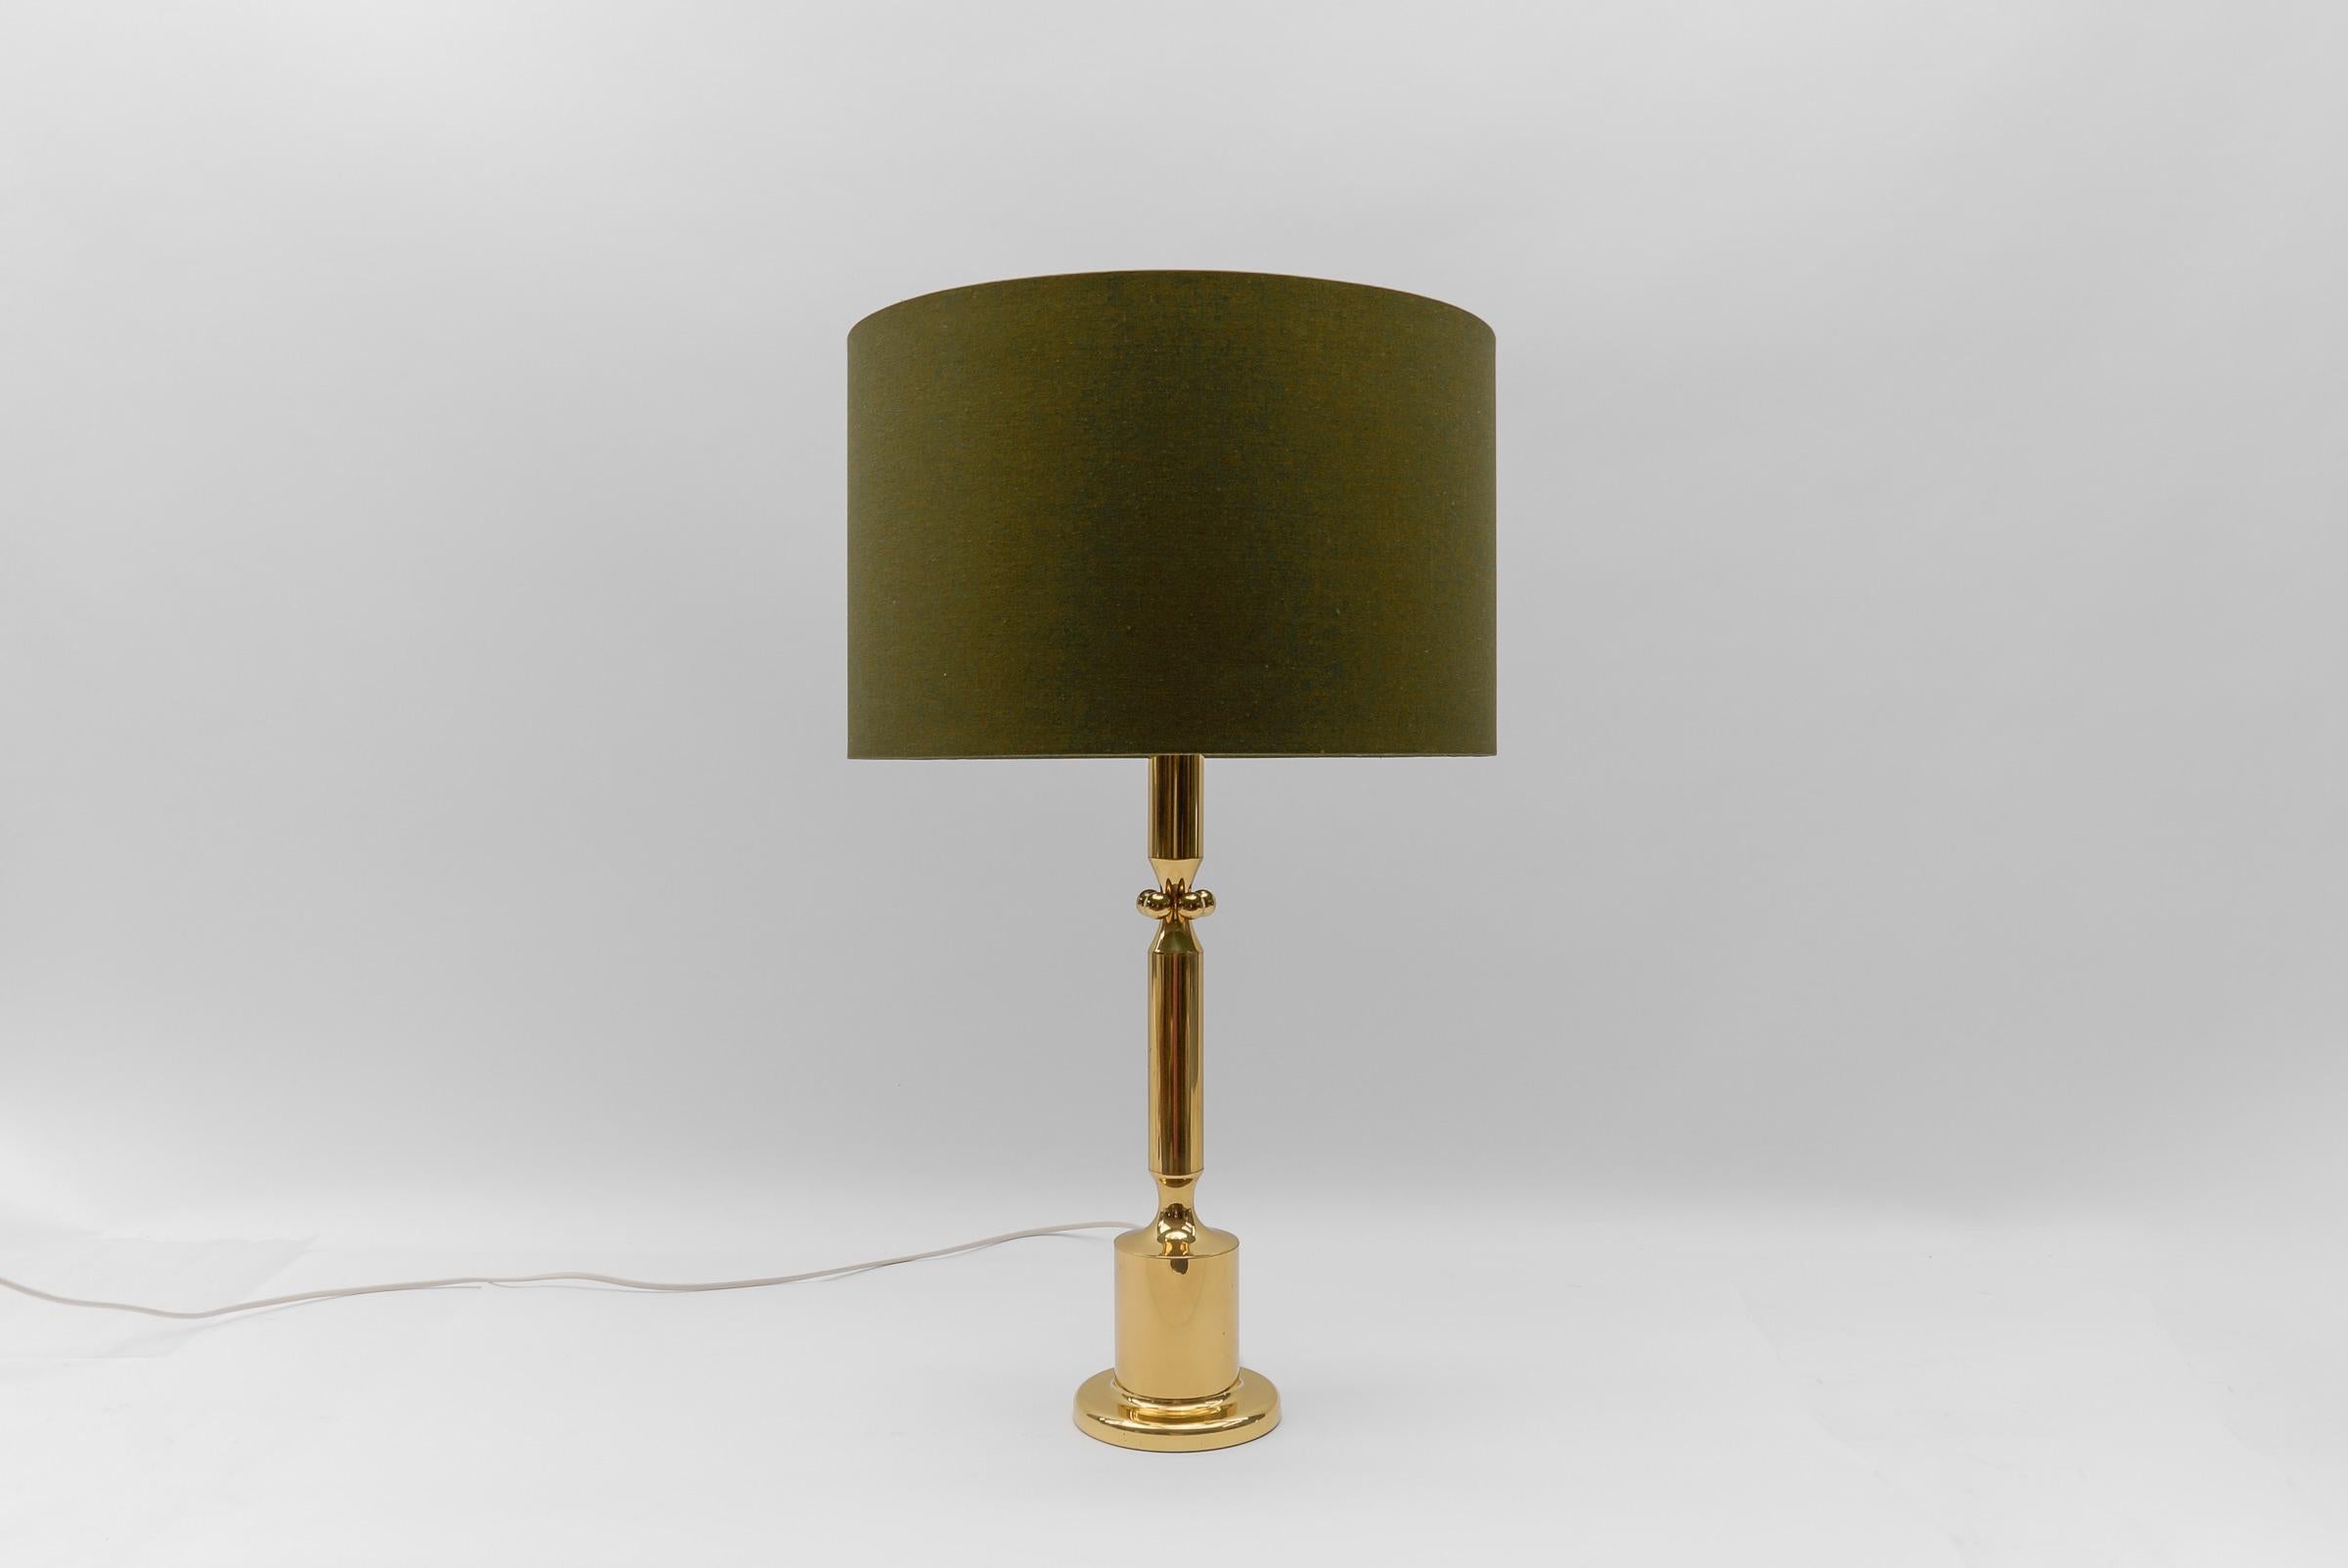 Mid Century Modern Gold Table Lamp Base, 1960s Germany

The lampshade is to illustrate how the lamp base looks with a shade. The shade has a diameter of 17.71 in. (45 cm) and height 11.41 in. (29 cm).

One E27 socket. Works with 220V and 110V.

Our